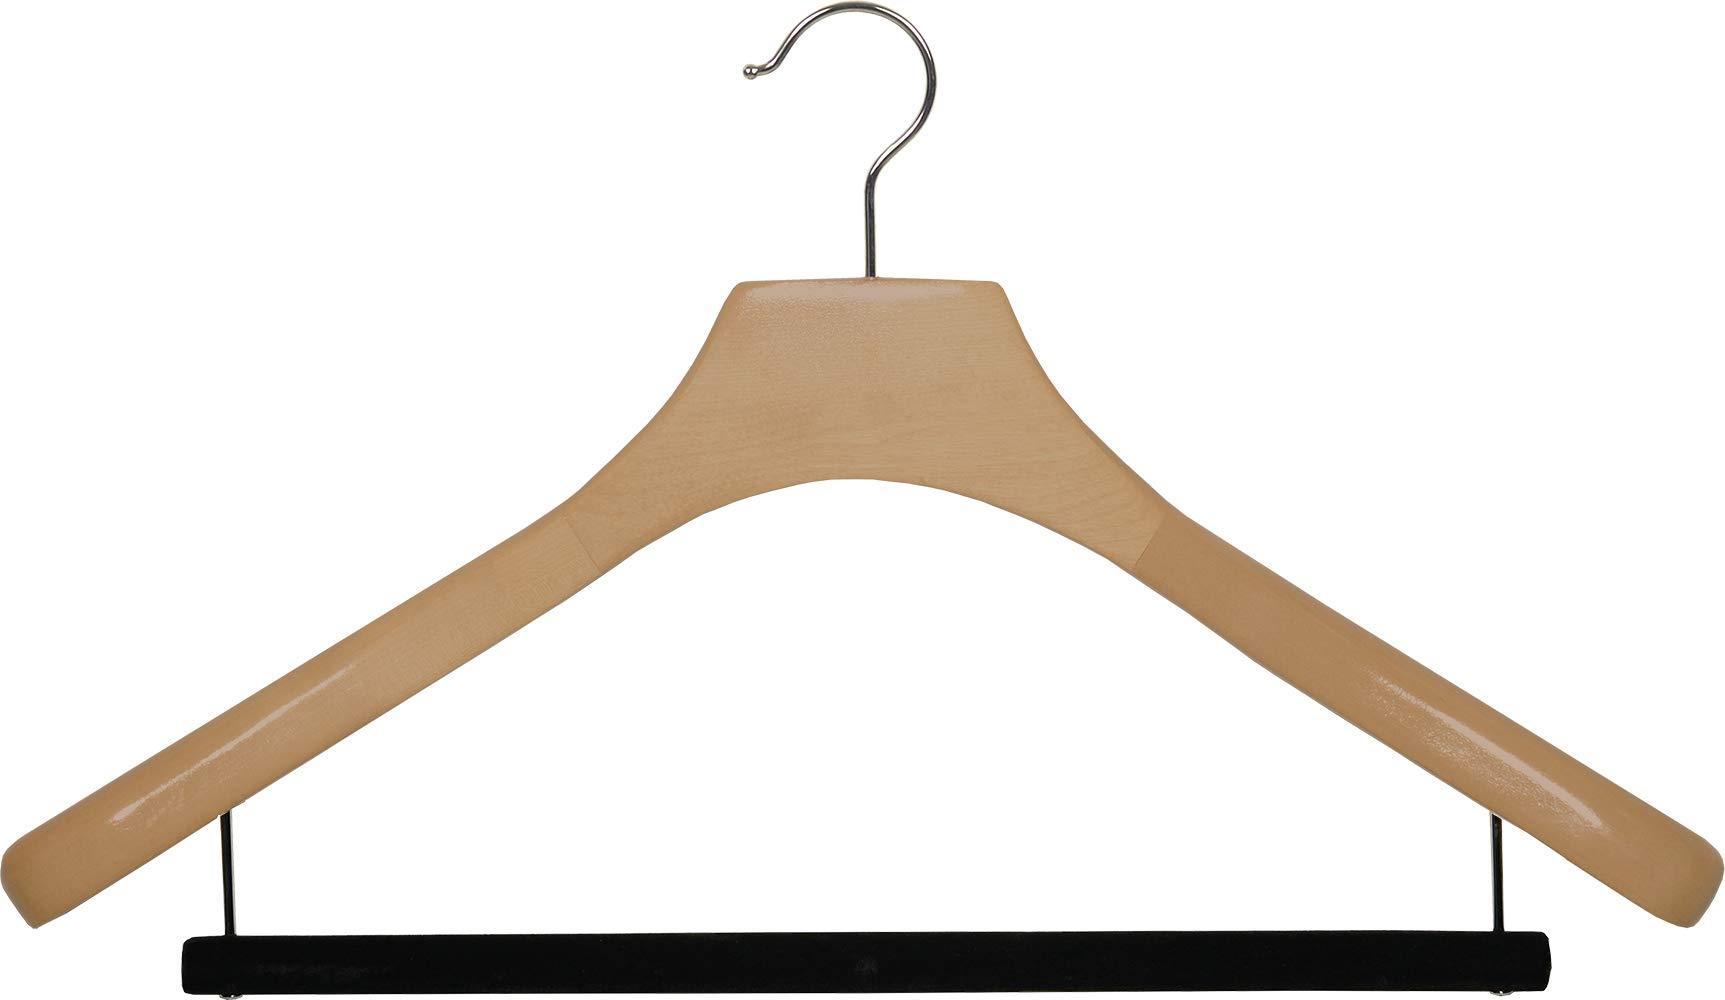 The Great American Hanger Company Curved Wood Suit Hanger w/Locking Bar, Box of 100 17 inch Hangers w/Natural Finish & Chrome